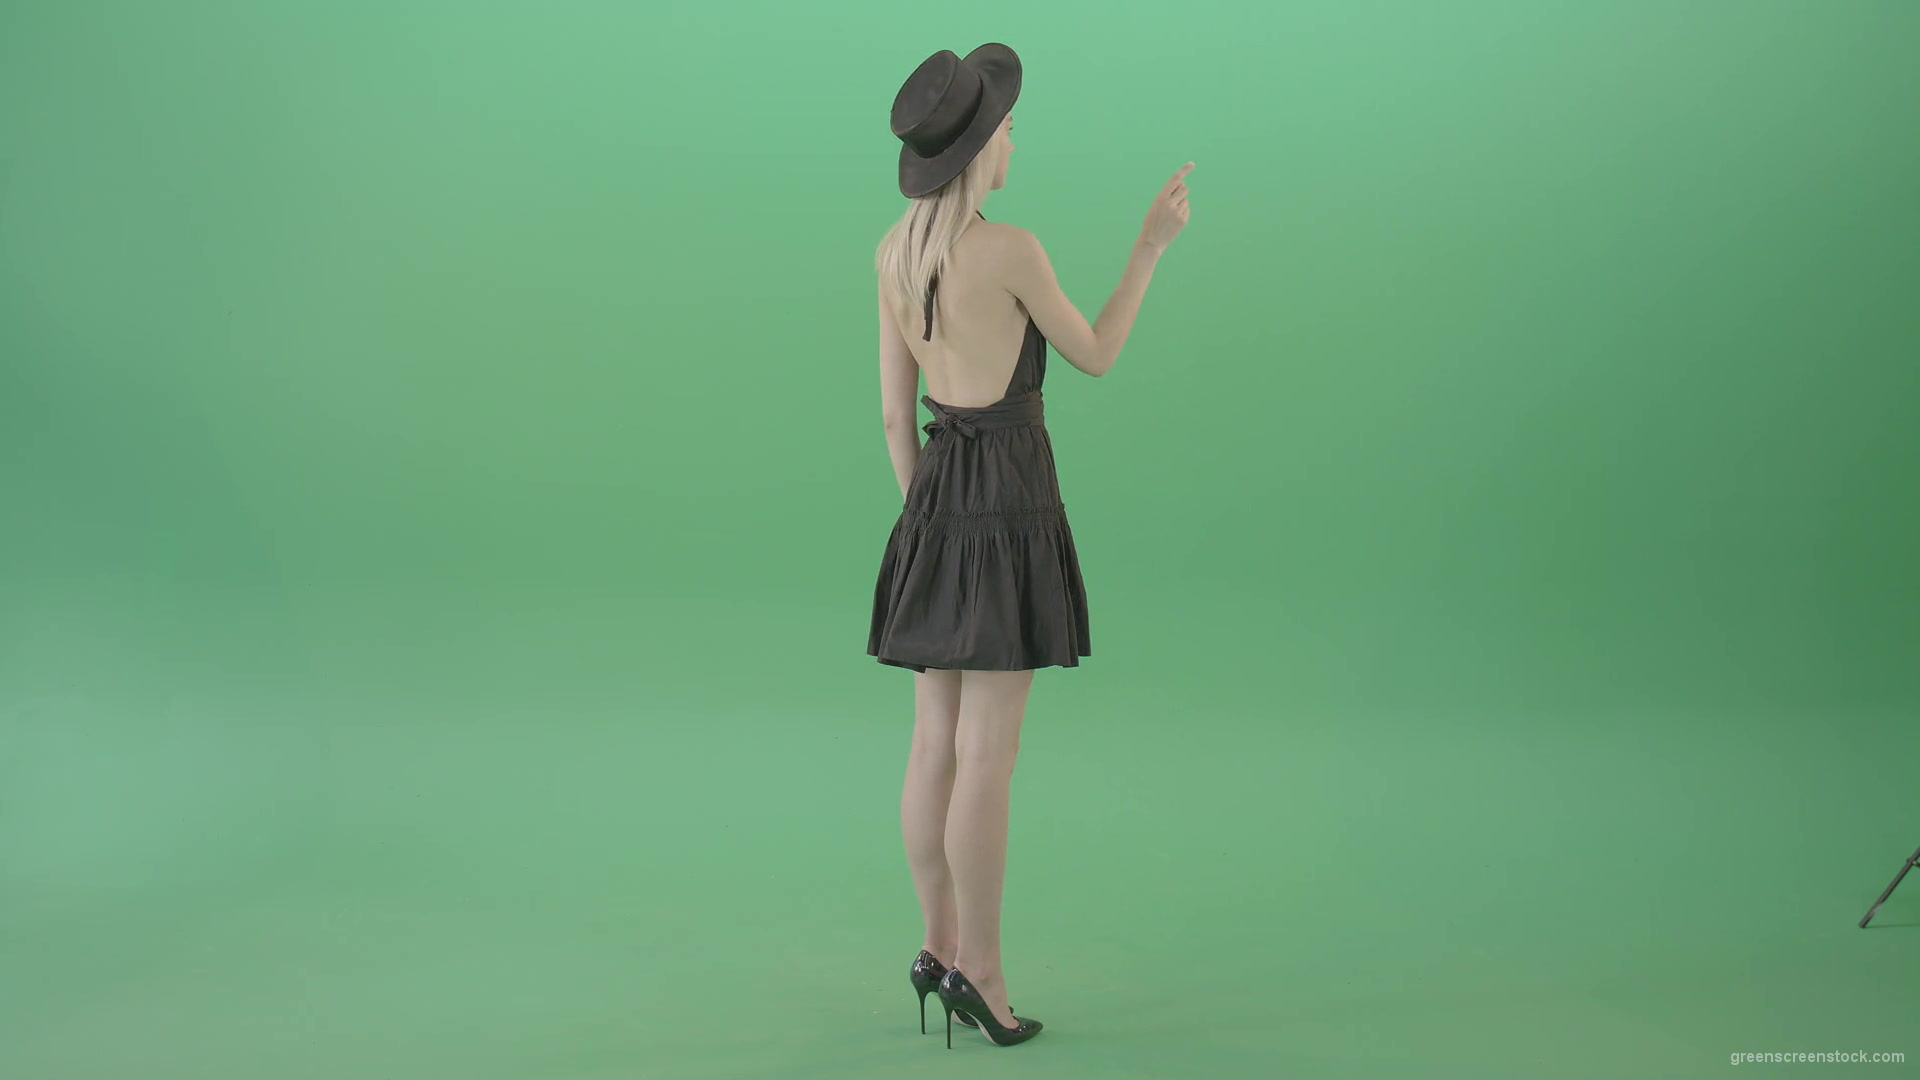 Full-size-fashion-girl-looking-virtual-products-on-touch-green-screen-4K-Video-Footage-1920_006 Green Screen Stock